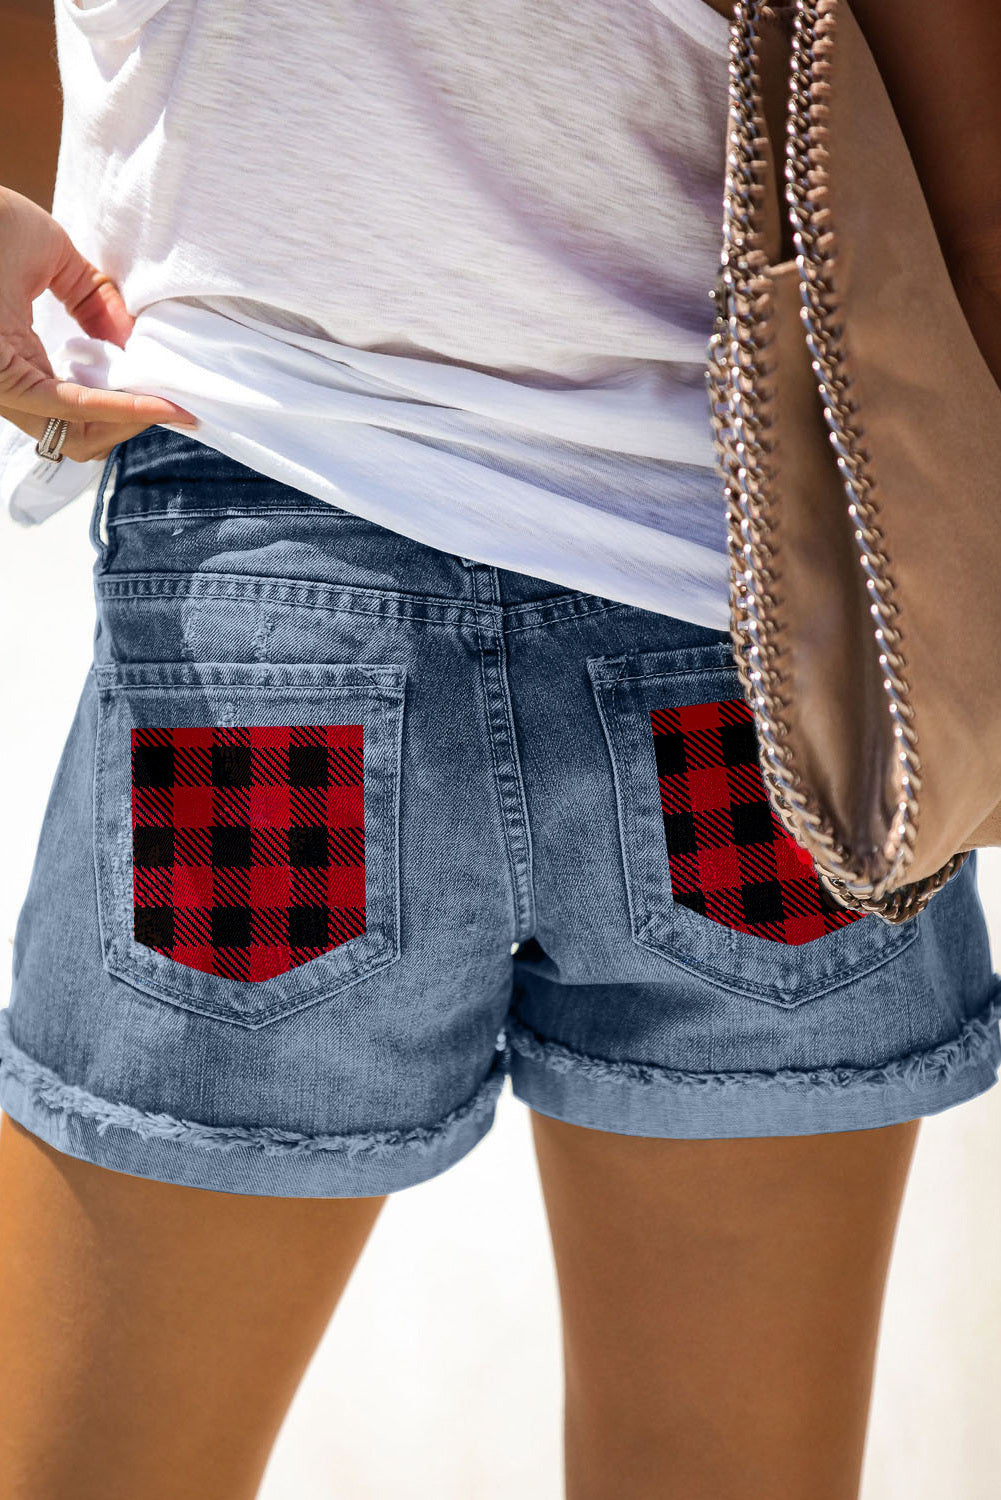 Red Plaid Denim Shorts Mid Rise Distressed Cuffed Jeans Shorts LC7831008-3